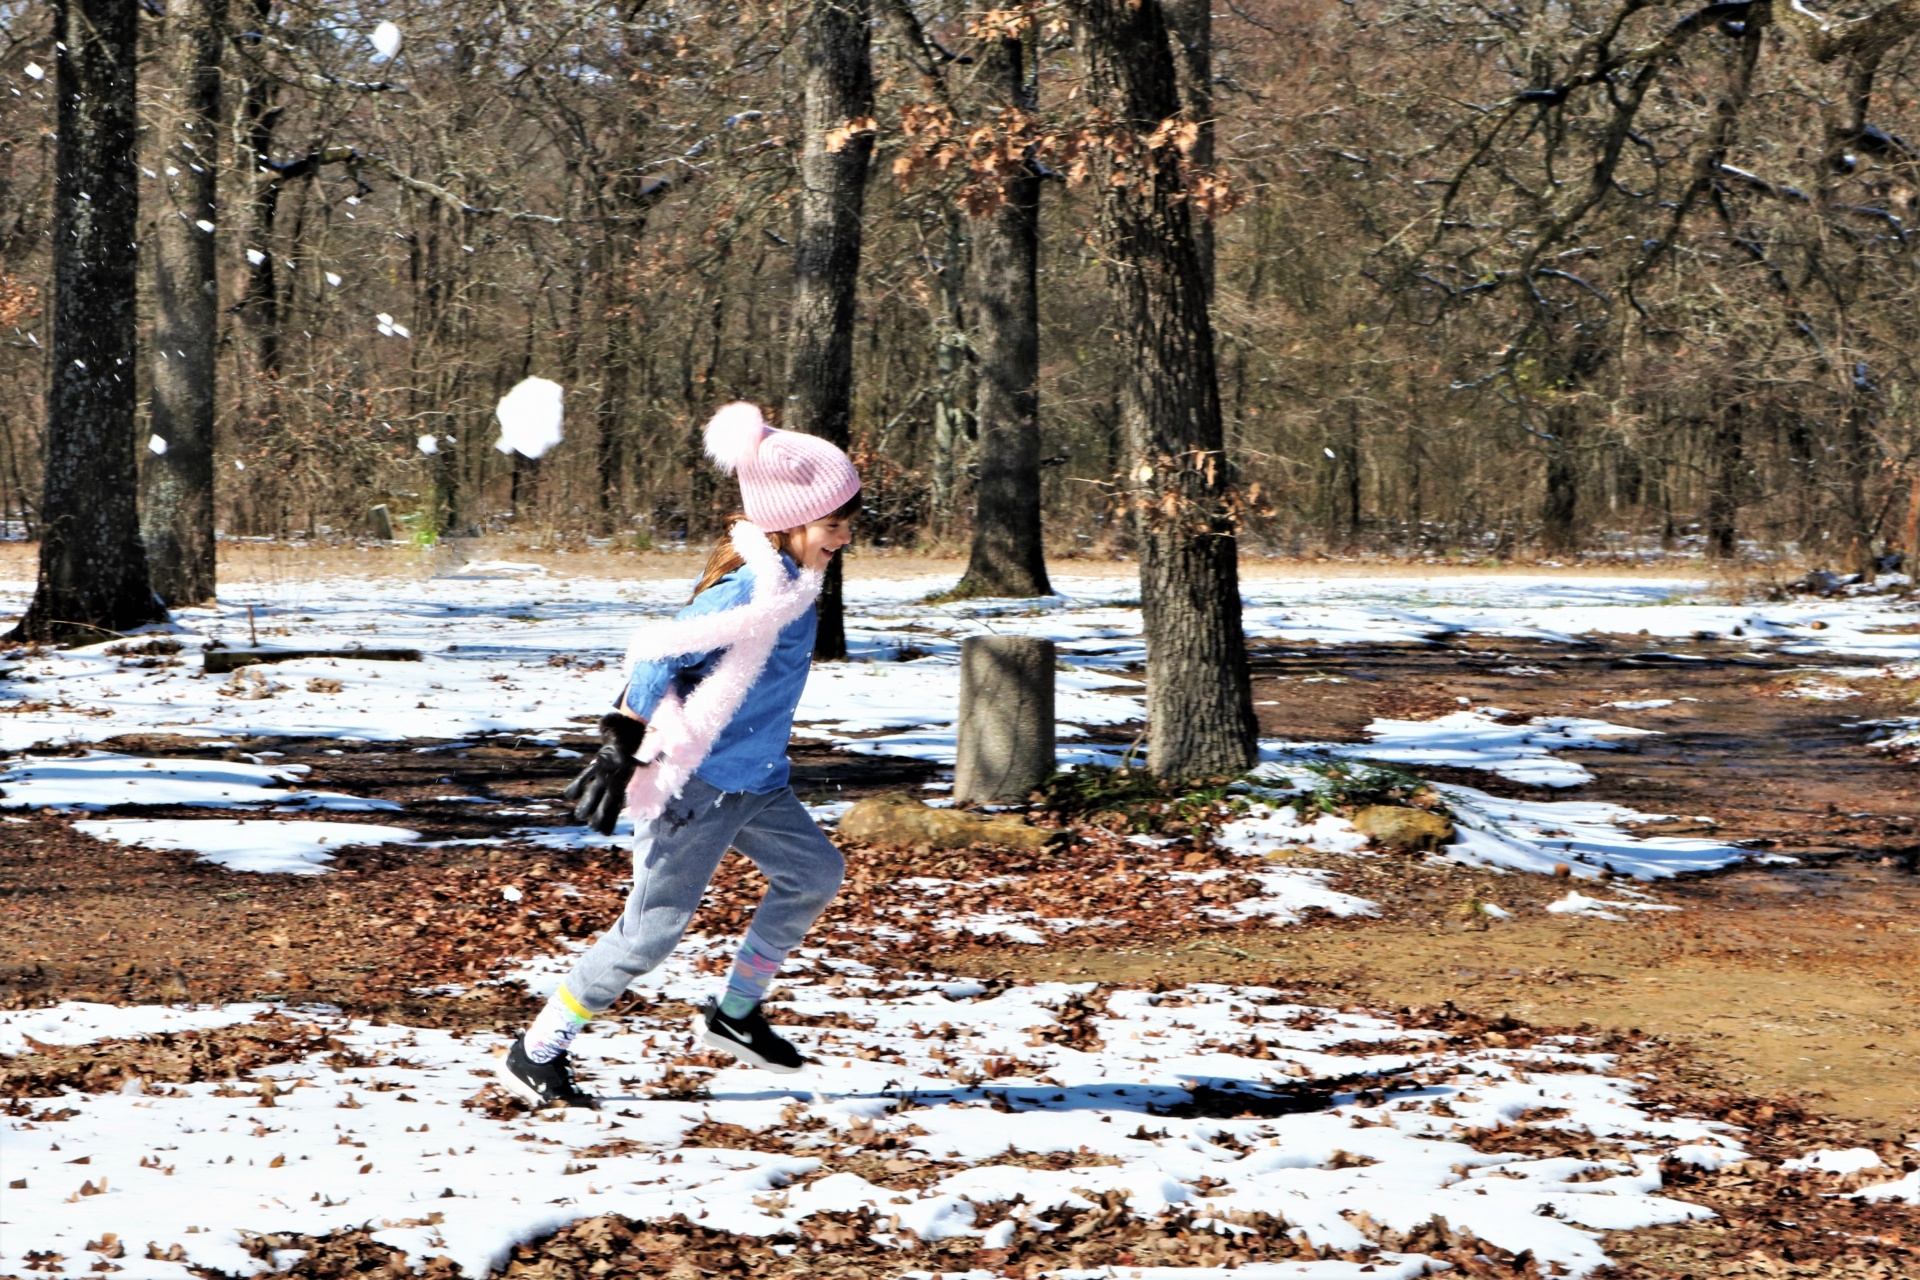 A cute little girl is running across the snow with a big snowball flying through the air behind her.